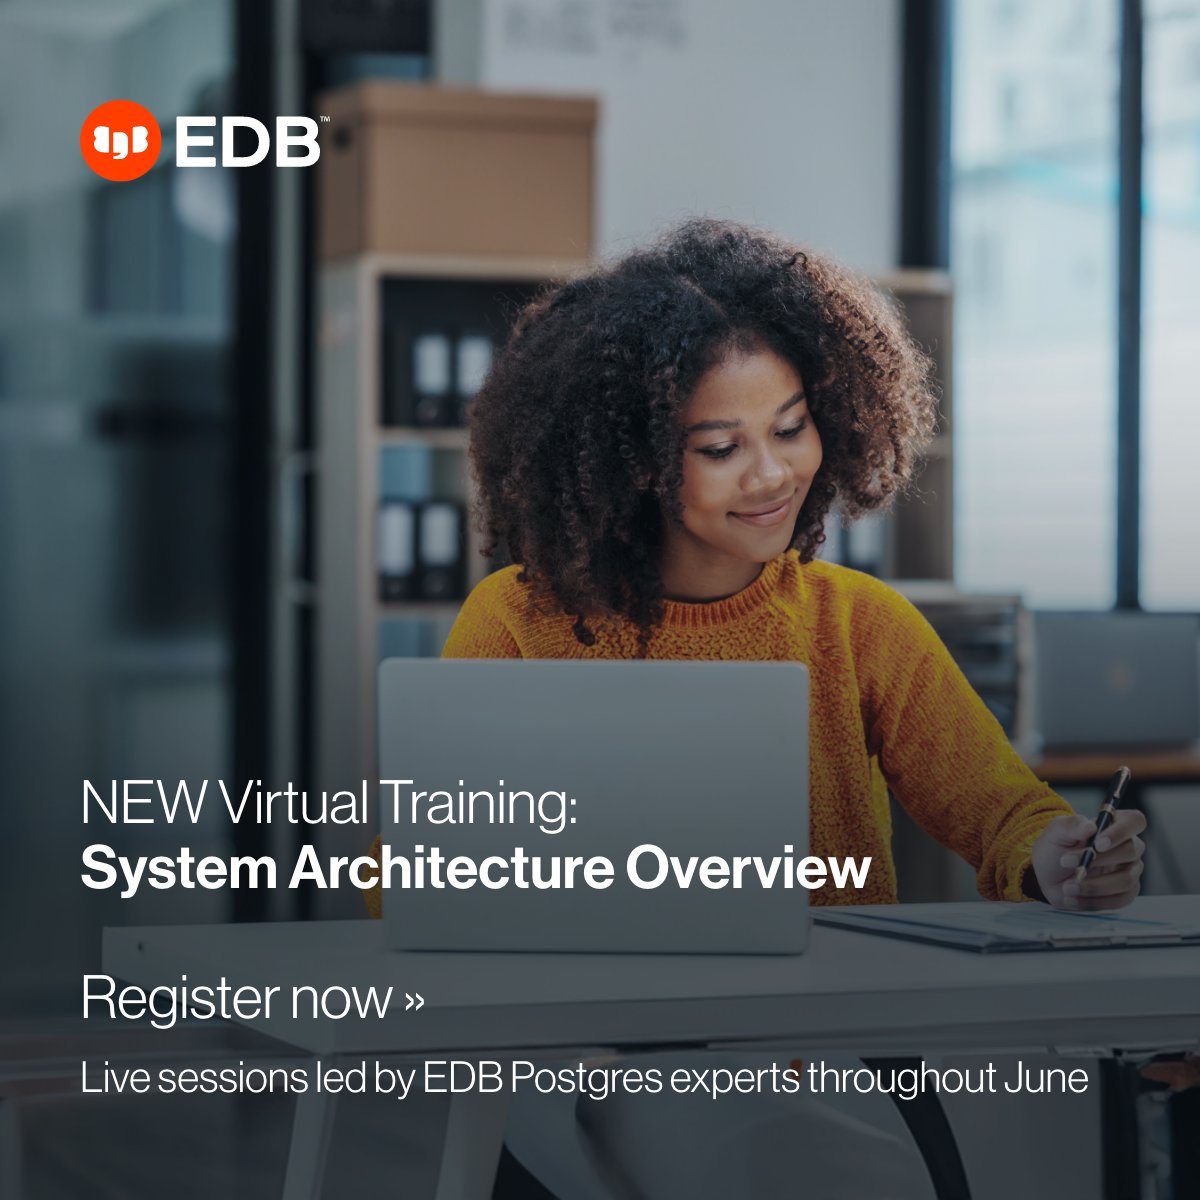 Announcing our first ever training session on 'System Architecture Overview' beginning in June. Get a comprehensive understanding of designing and implementing effective database systems in this live workshop led by Postgres experts. Enroll today. bit.ly/3TOO19v